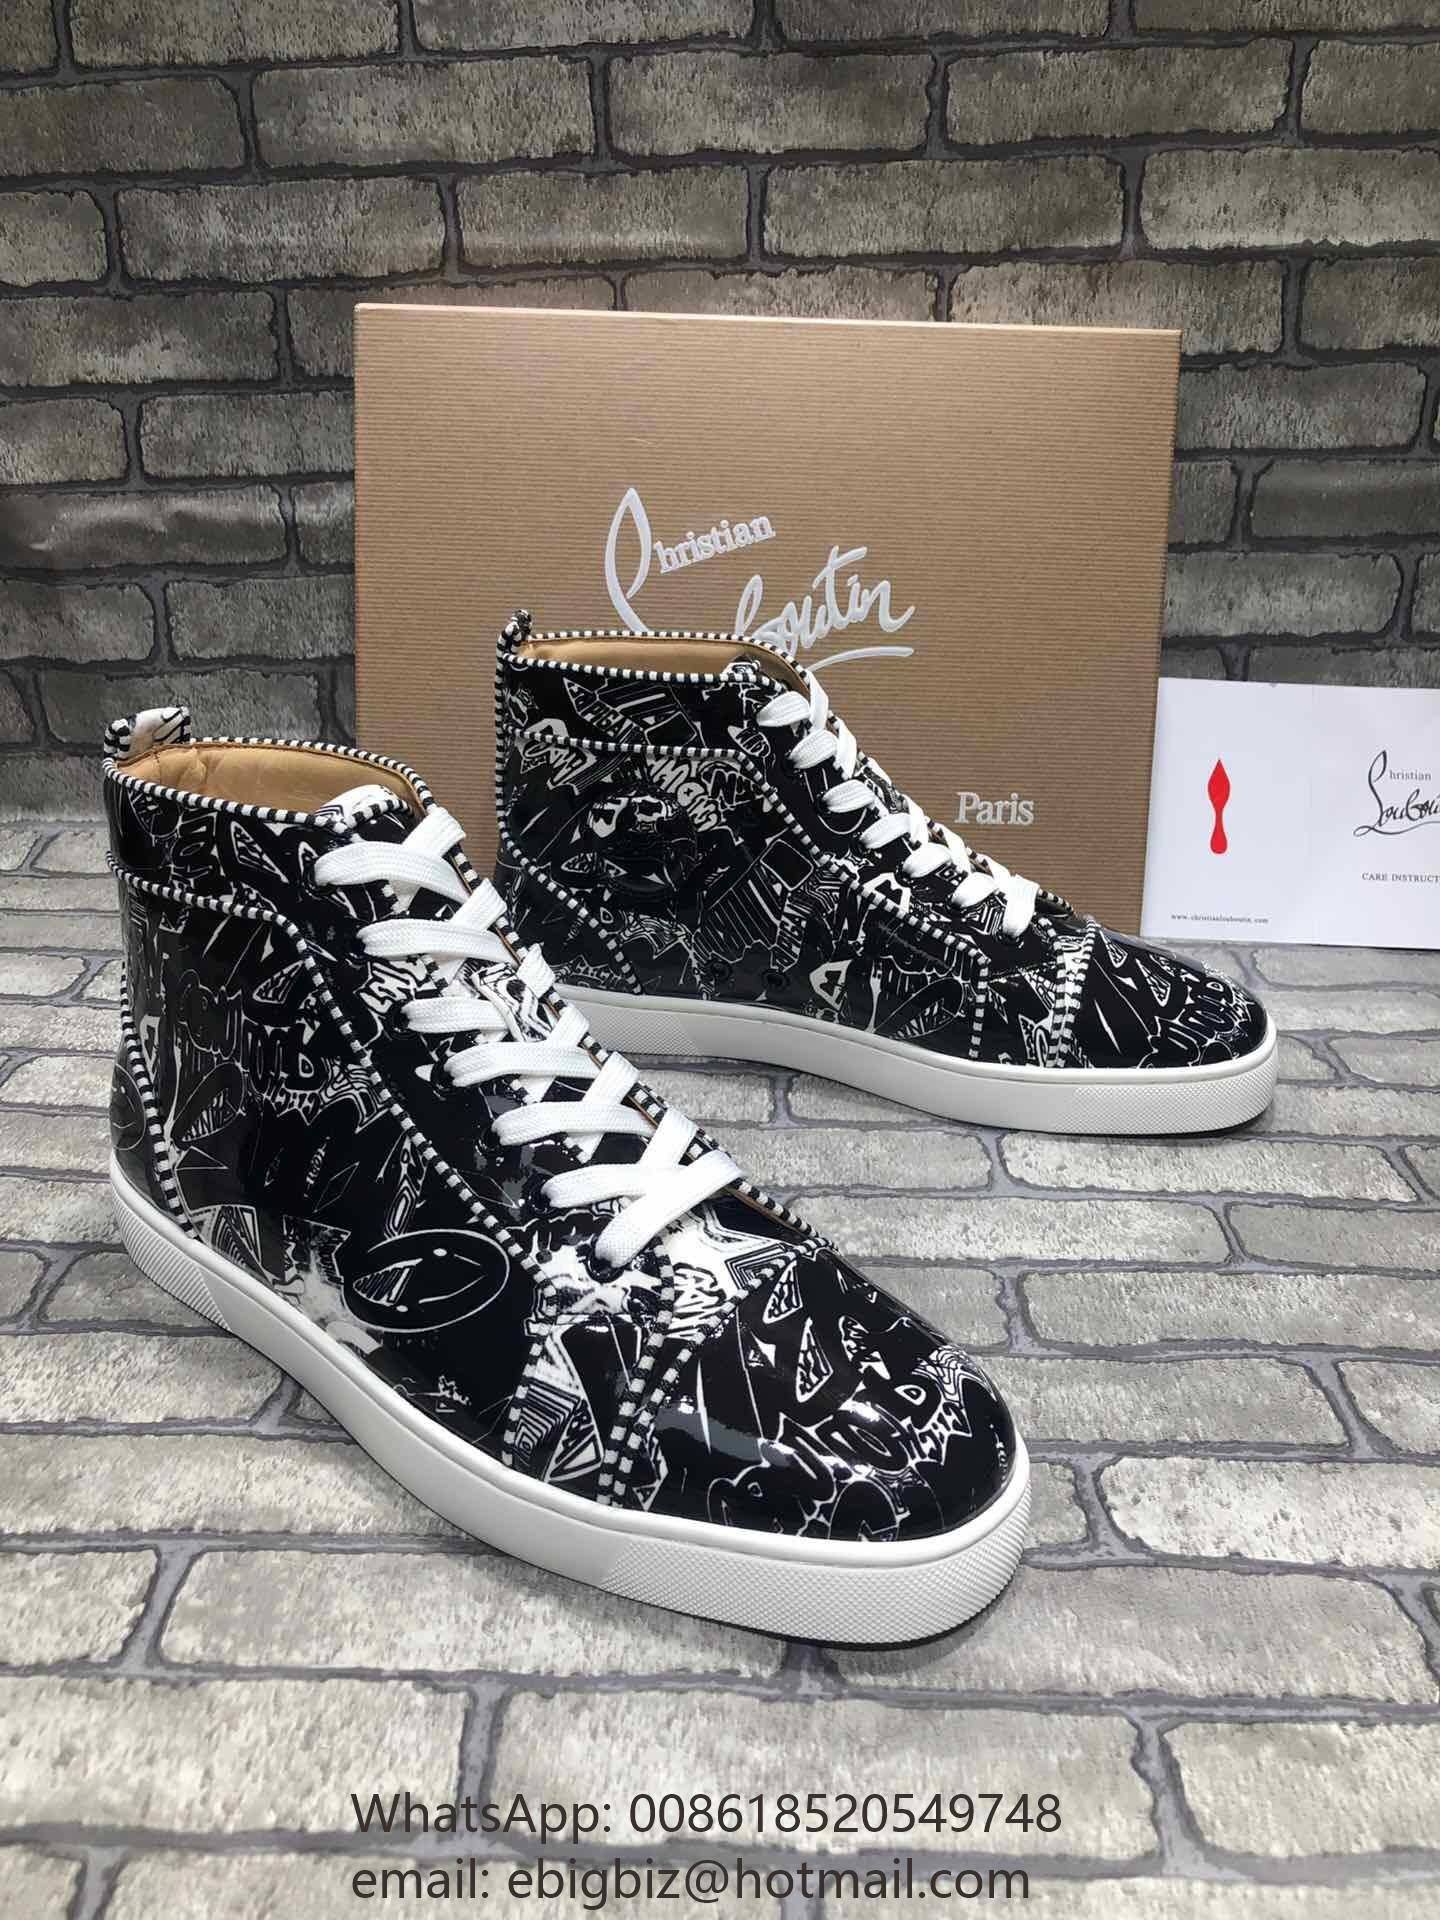 Christian Louboutin Shoes Men Price Online Sale, UP TO 70%